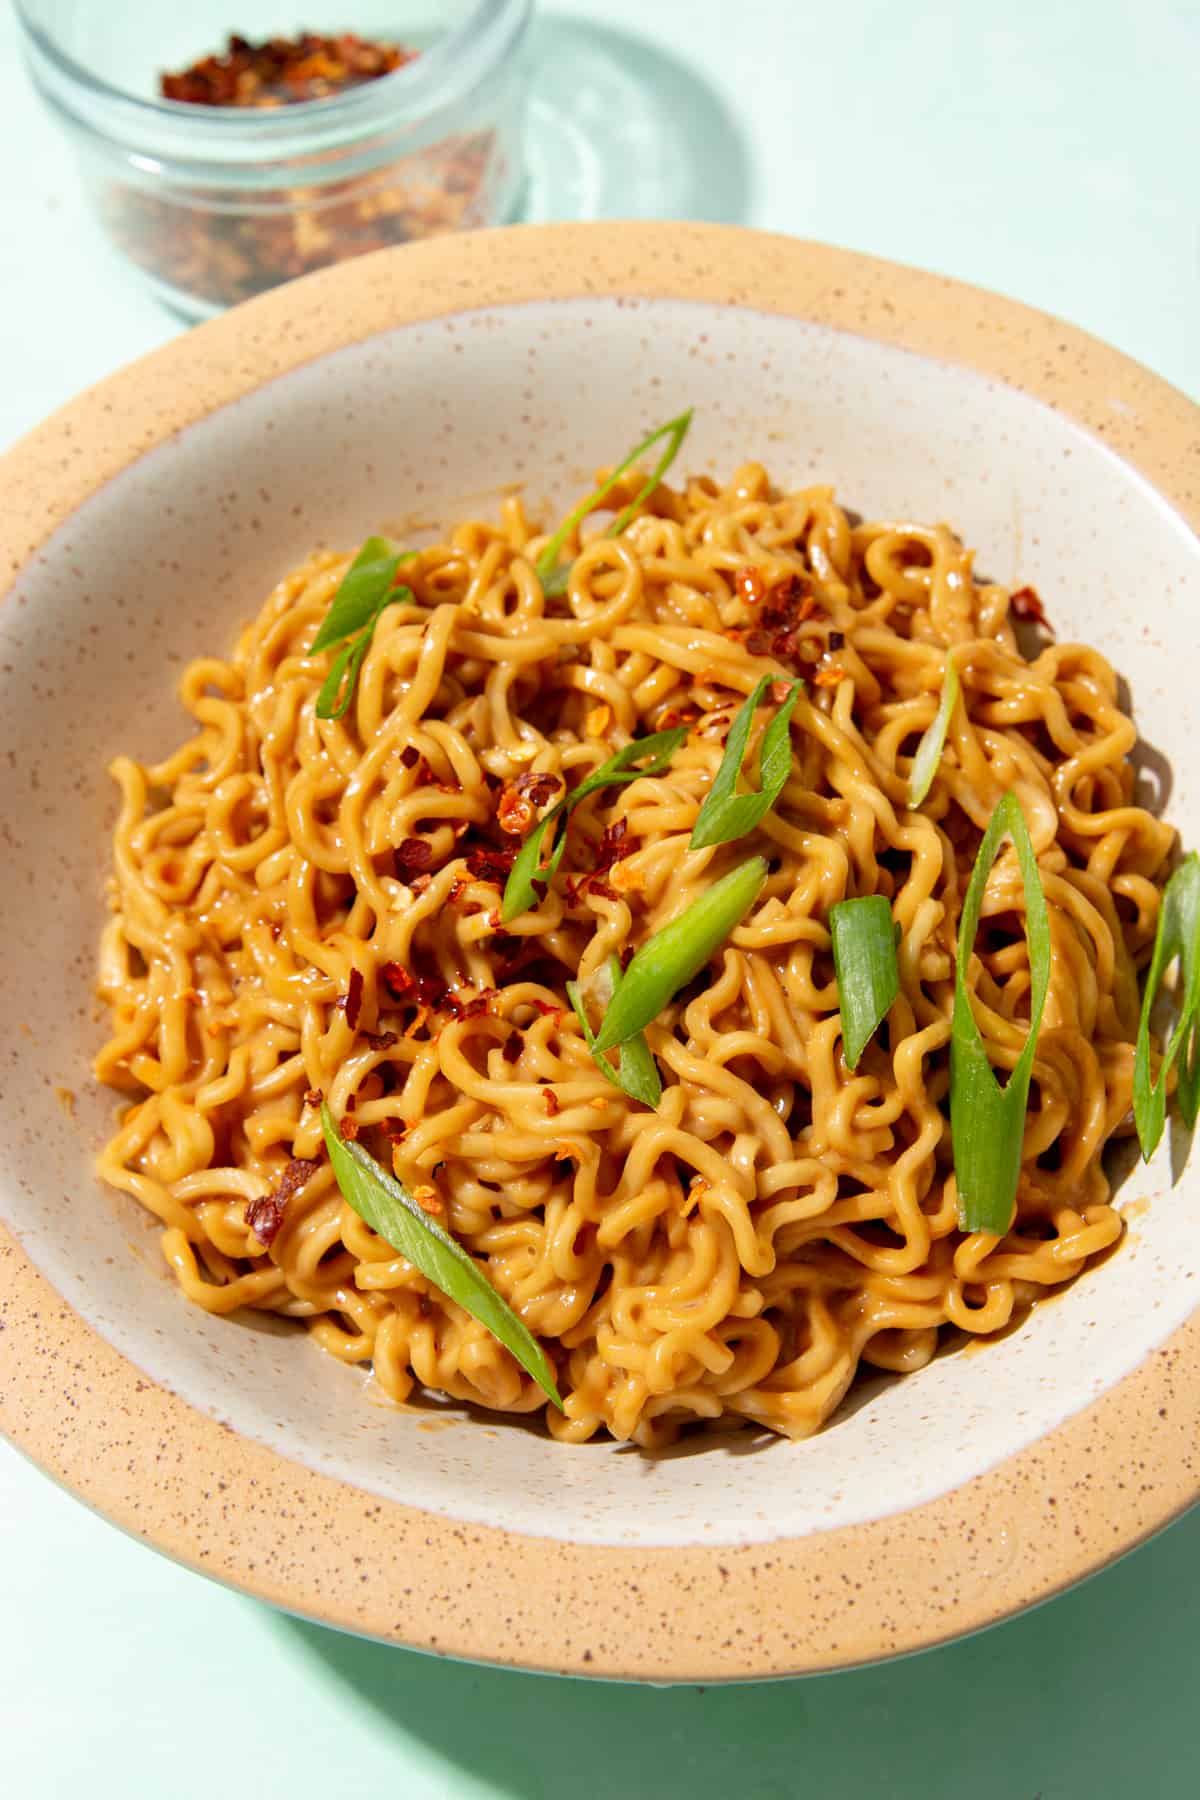 Noodles in bowl with slices of spring onion and chillies  and a glass bowl of chillies behind plate.